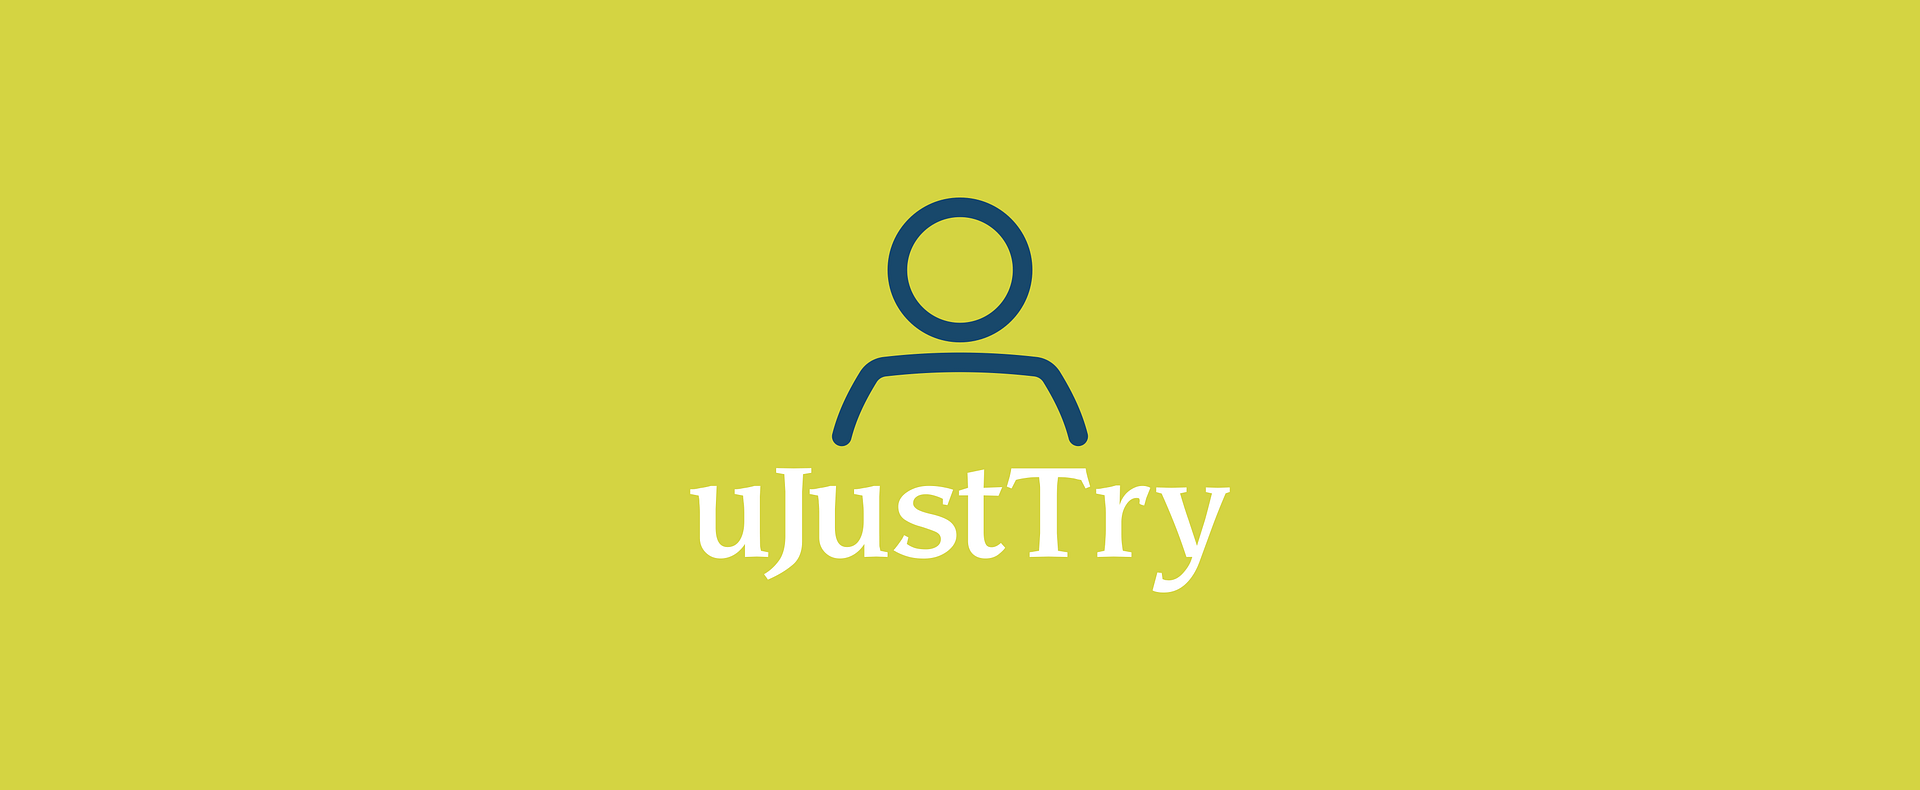 uJustTry - You Just Try